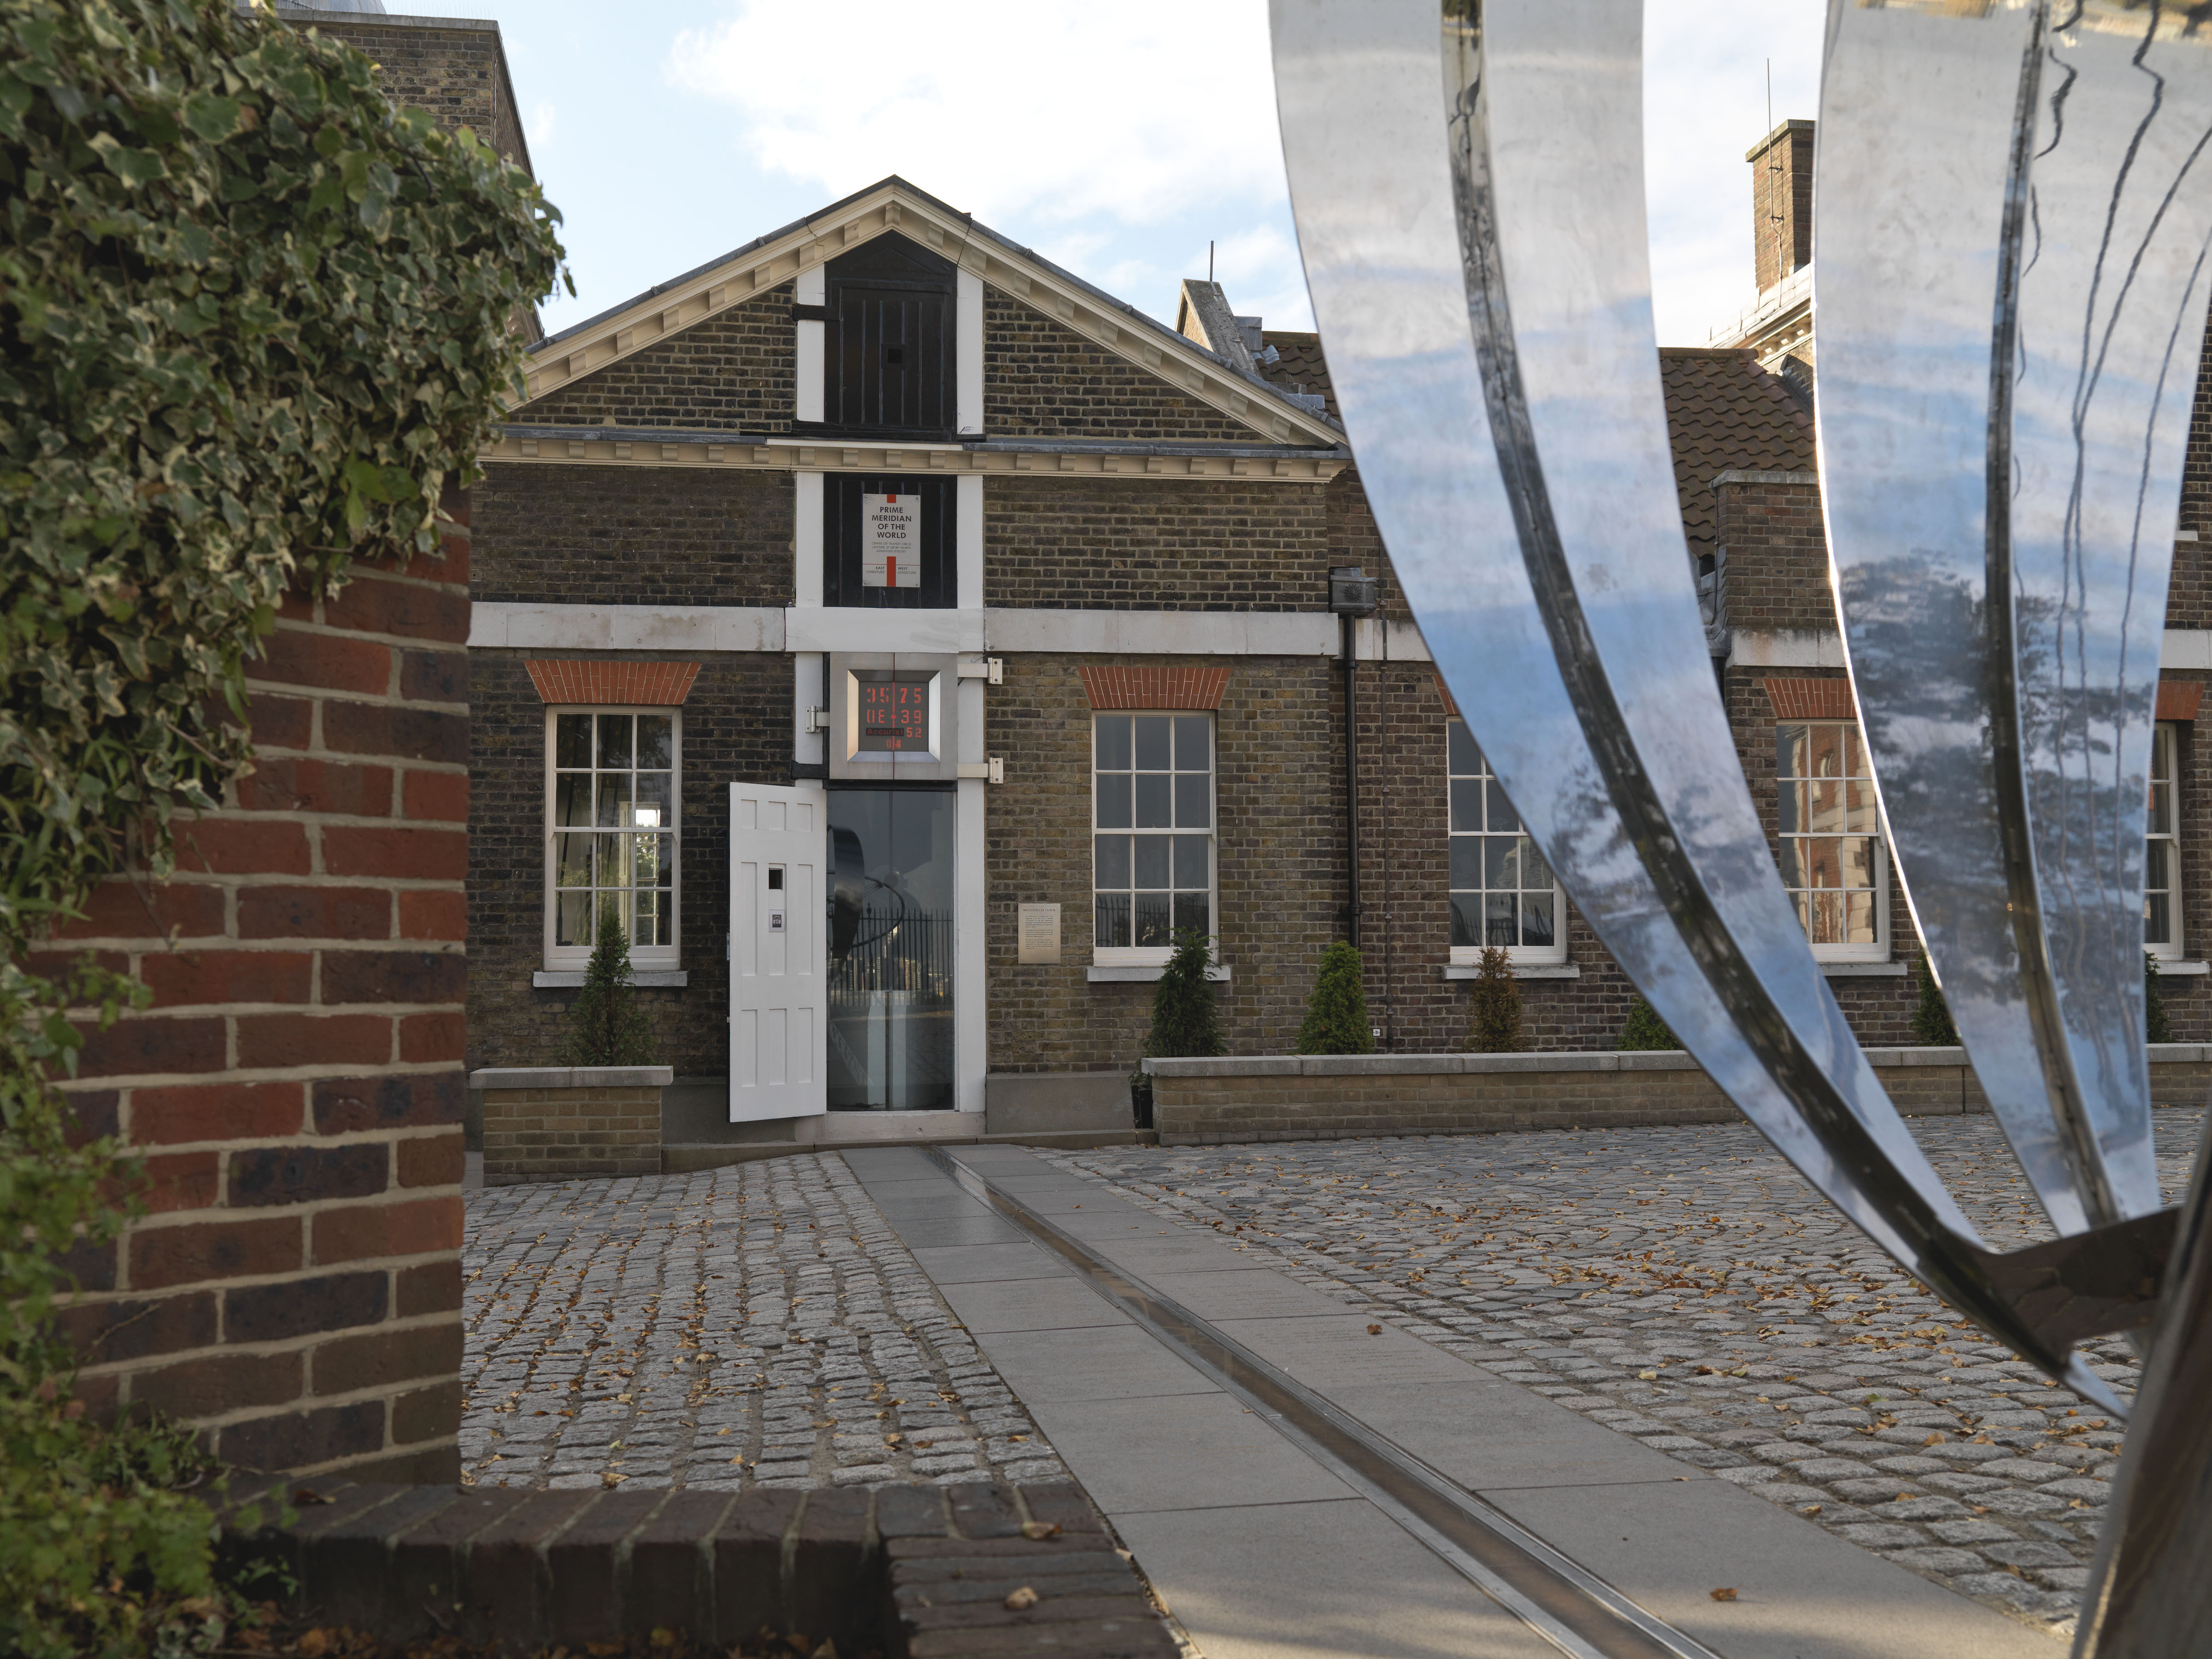 The Prime Meridian at Greenwich | Explore Royal Museums Greenwich